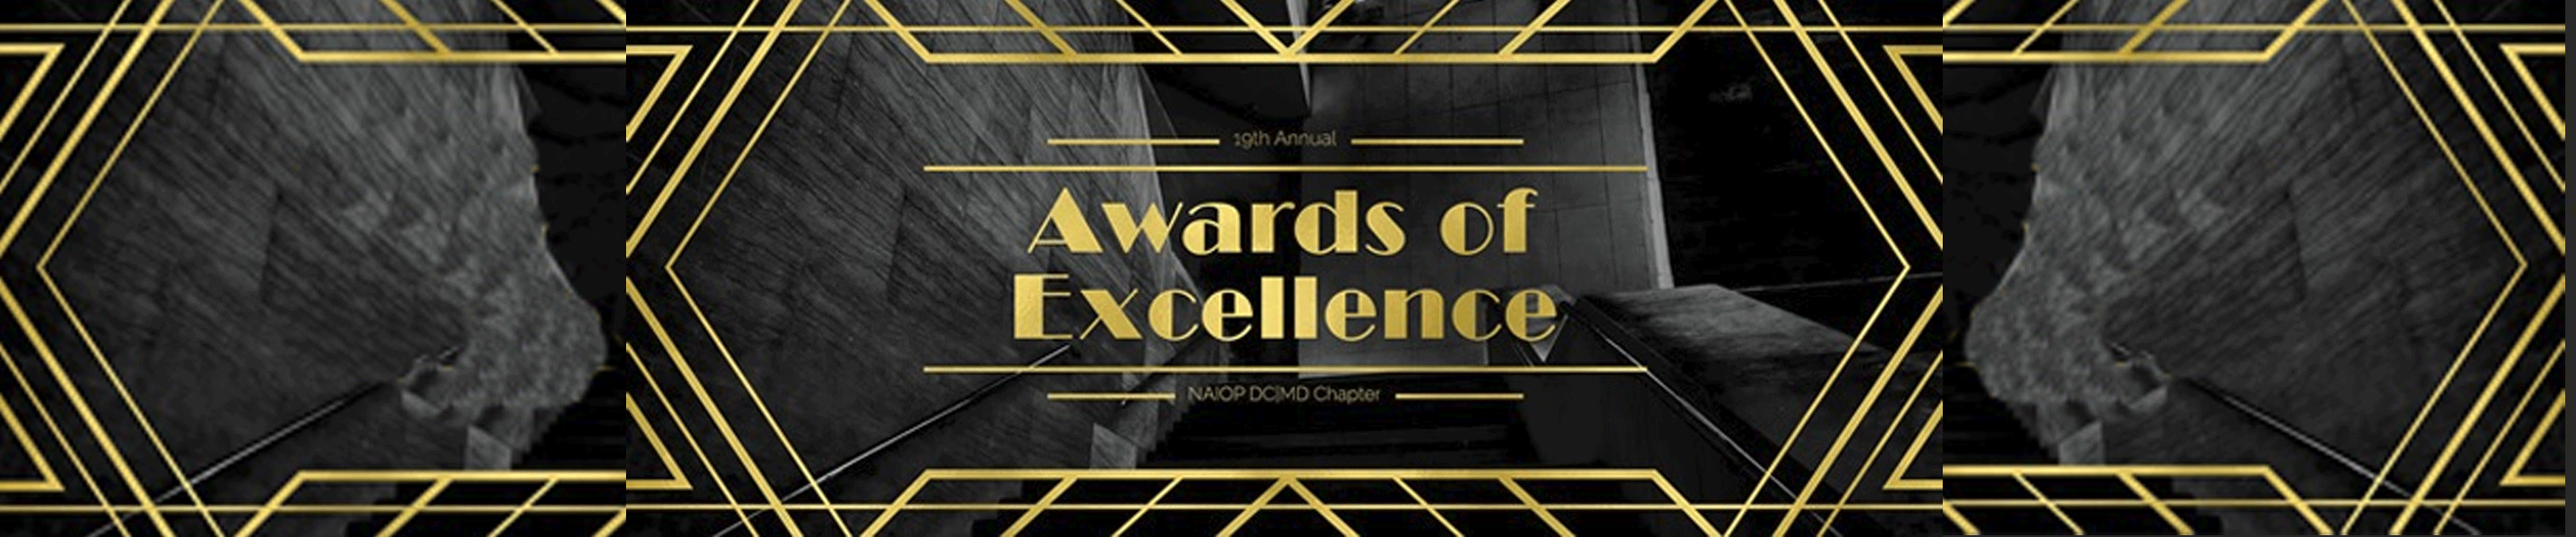 Awards of Excellence 2021